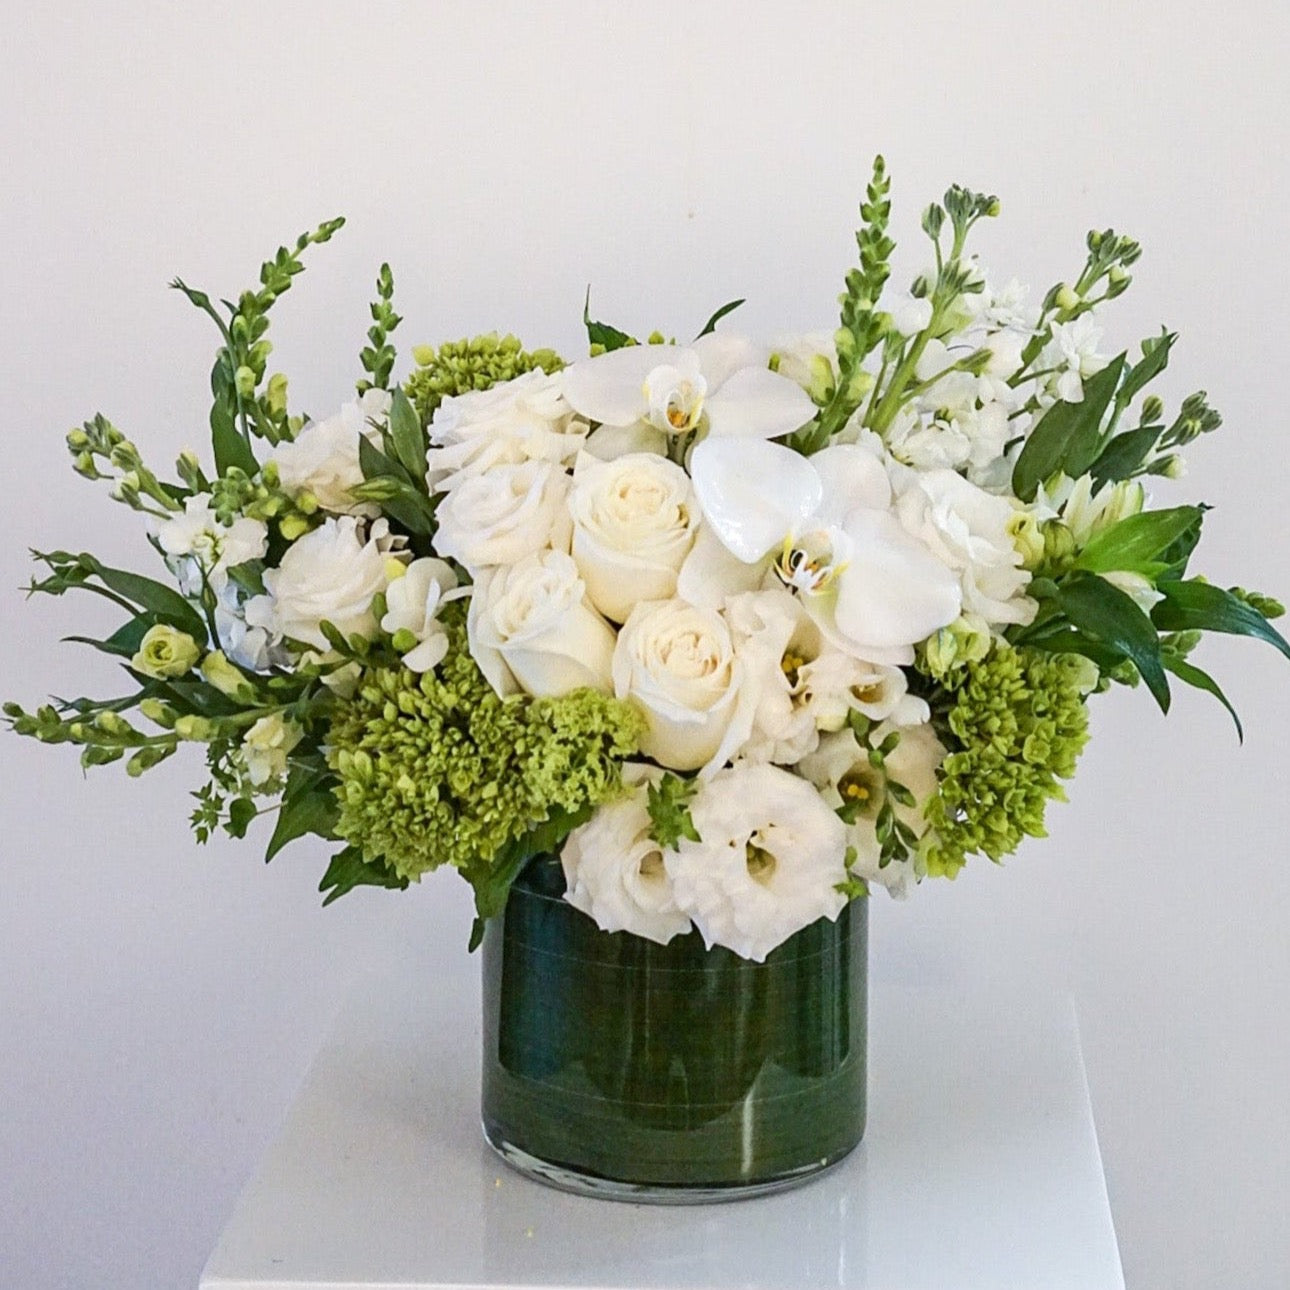 Blooms of bright white, cream and lime green. The combination is rich with texture and innocent beauty. Presented in a 6x6" cylinder glass vase that they will use later for roses, tulips, potpourri, etc. 